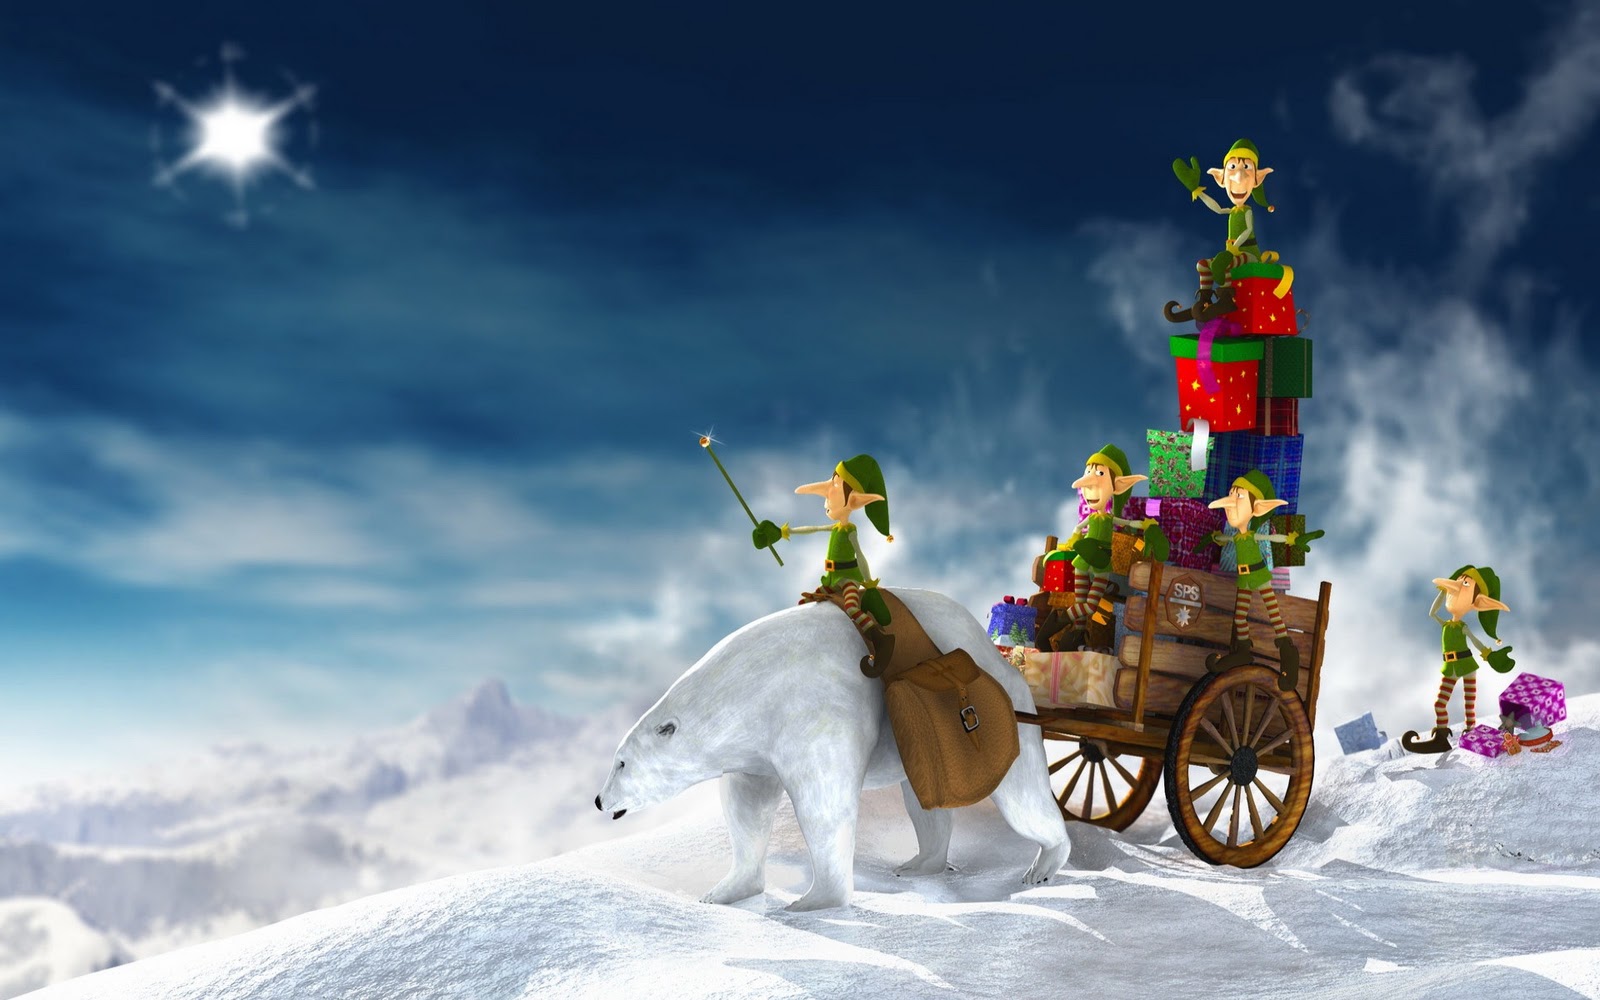 fun with faisy: Christmas 6 ,HD Wallpapers